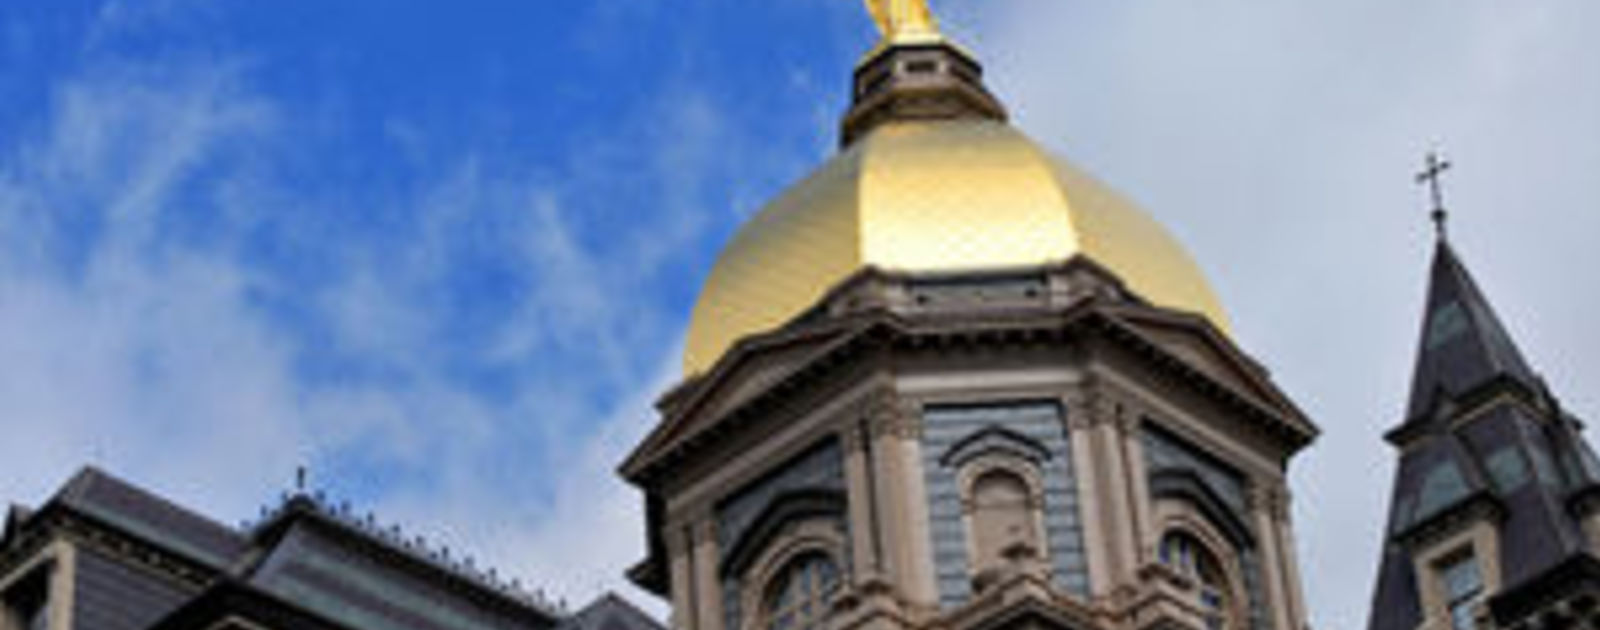 University of Notre Dame Releases Restrictive Early Action Decisions for the Class of 2027 | Stories & News | Visit & Engage | Undergraduate Admissions